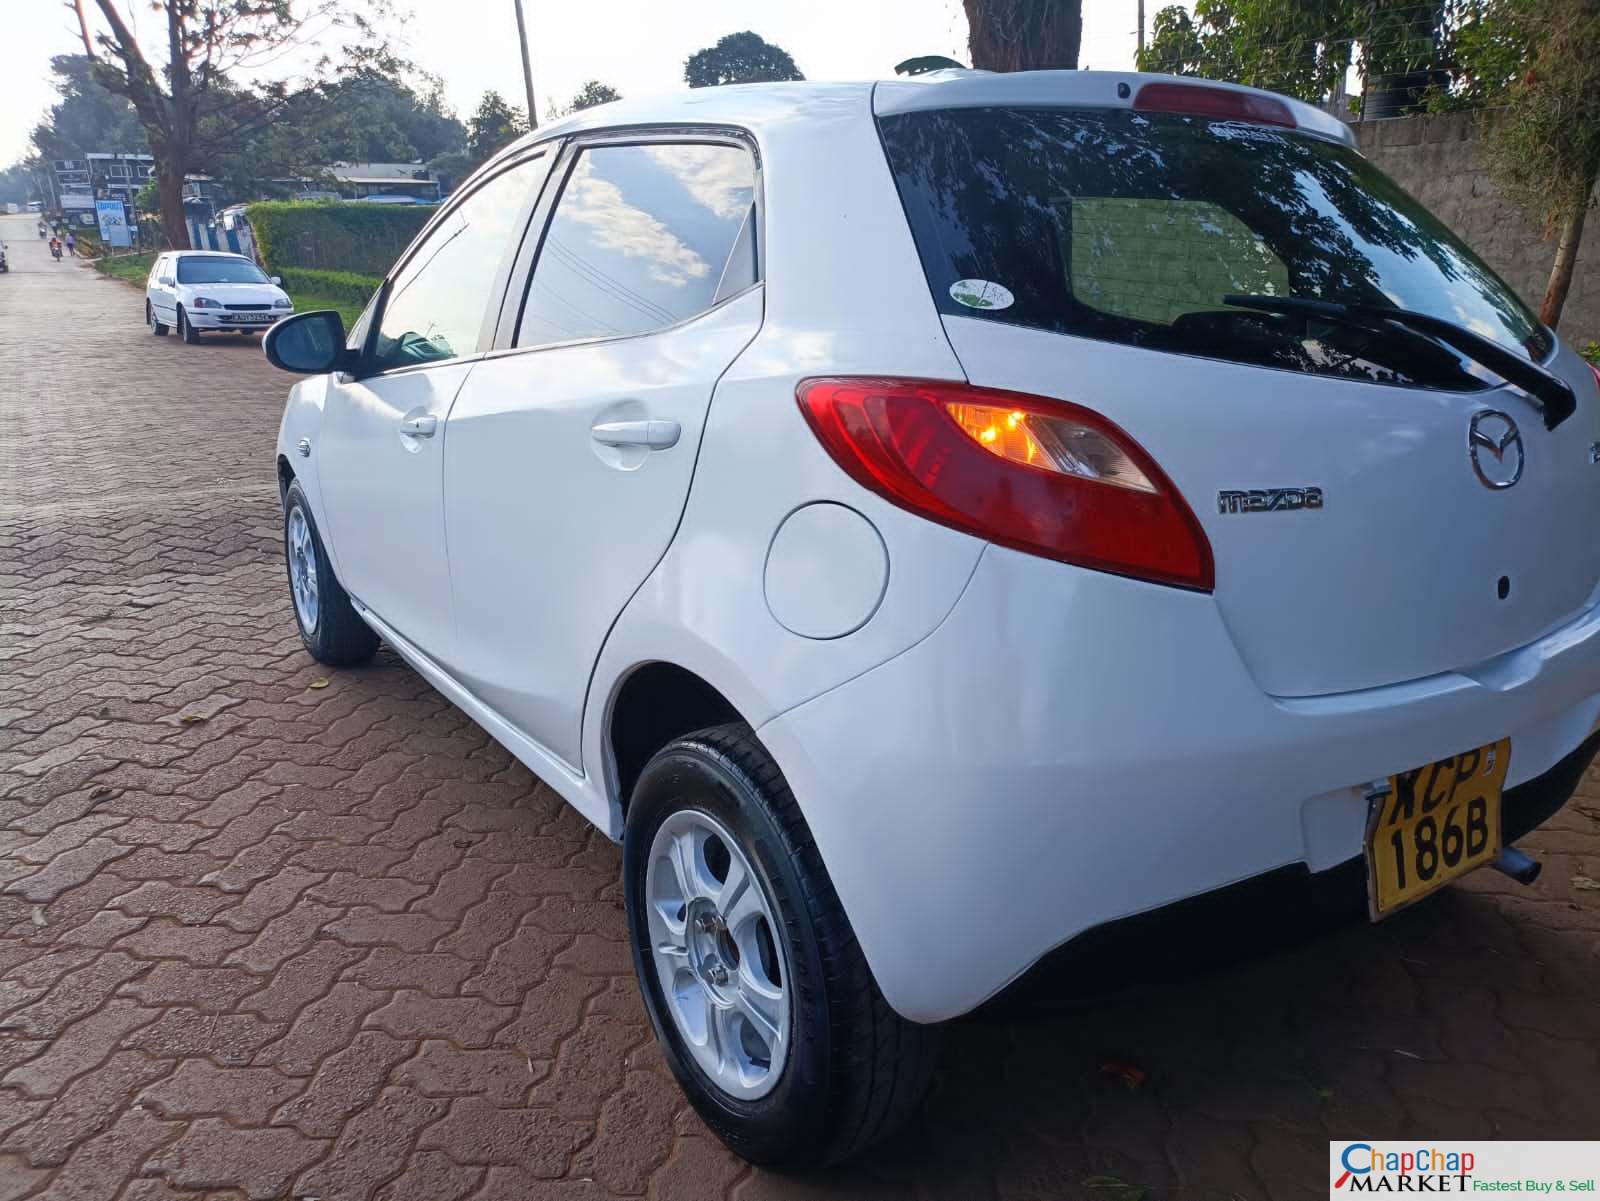 Mazda Demio 🔥 🔥 You Pay 30% DEPOSIT TRADE IN OK EXCLUSIVE demio for sale in kenya hire purchase installments